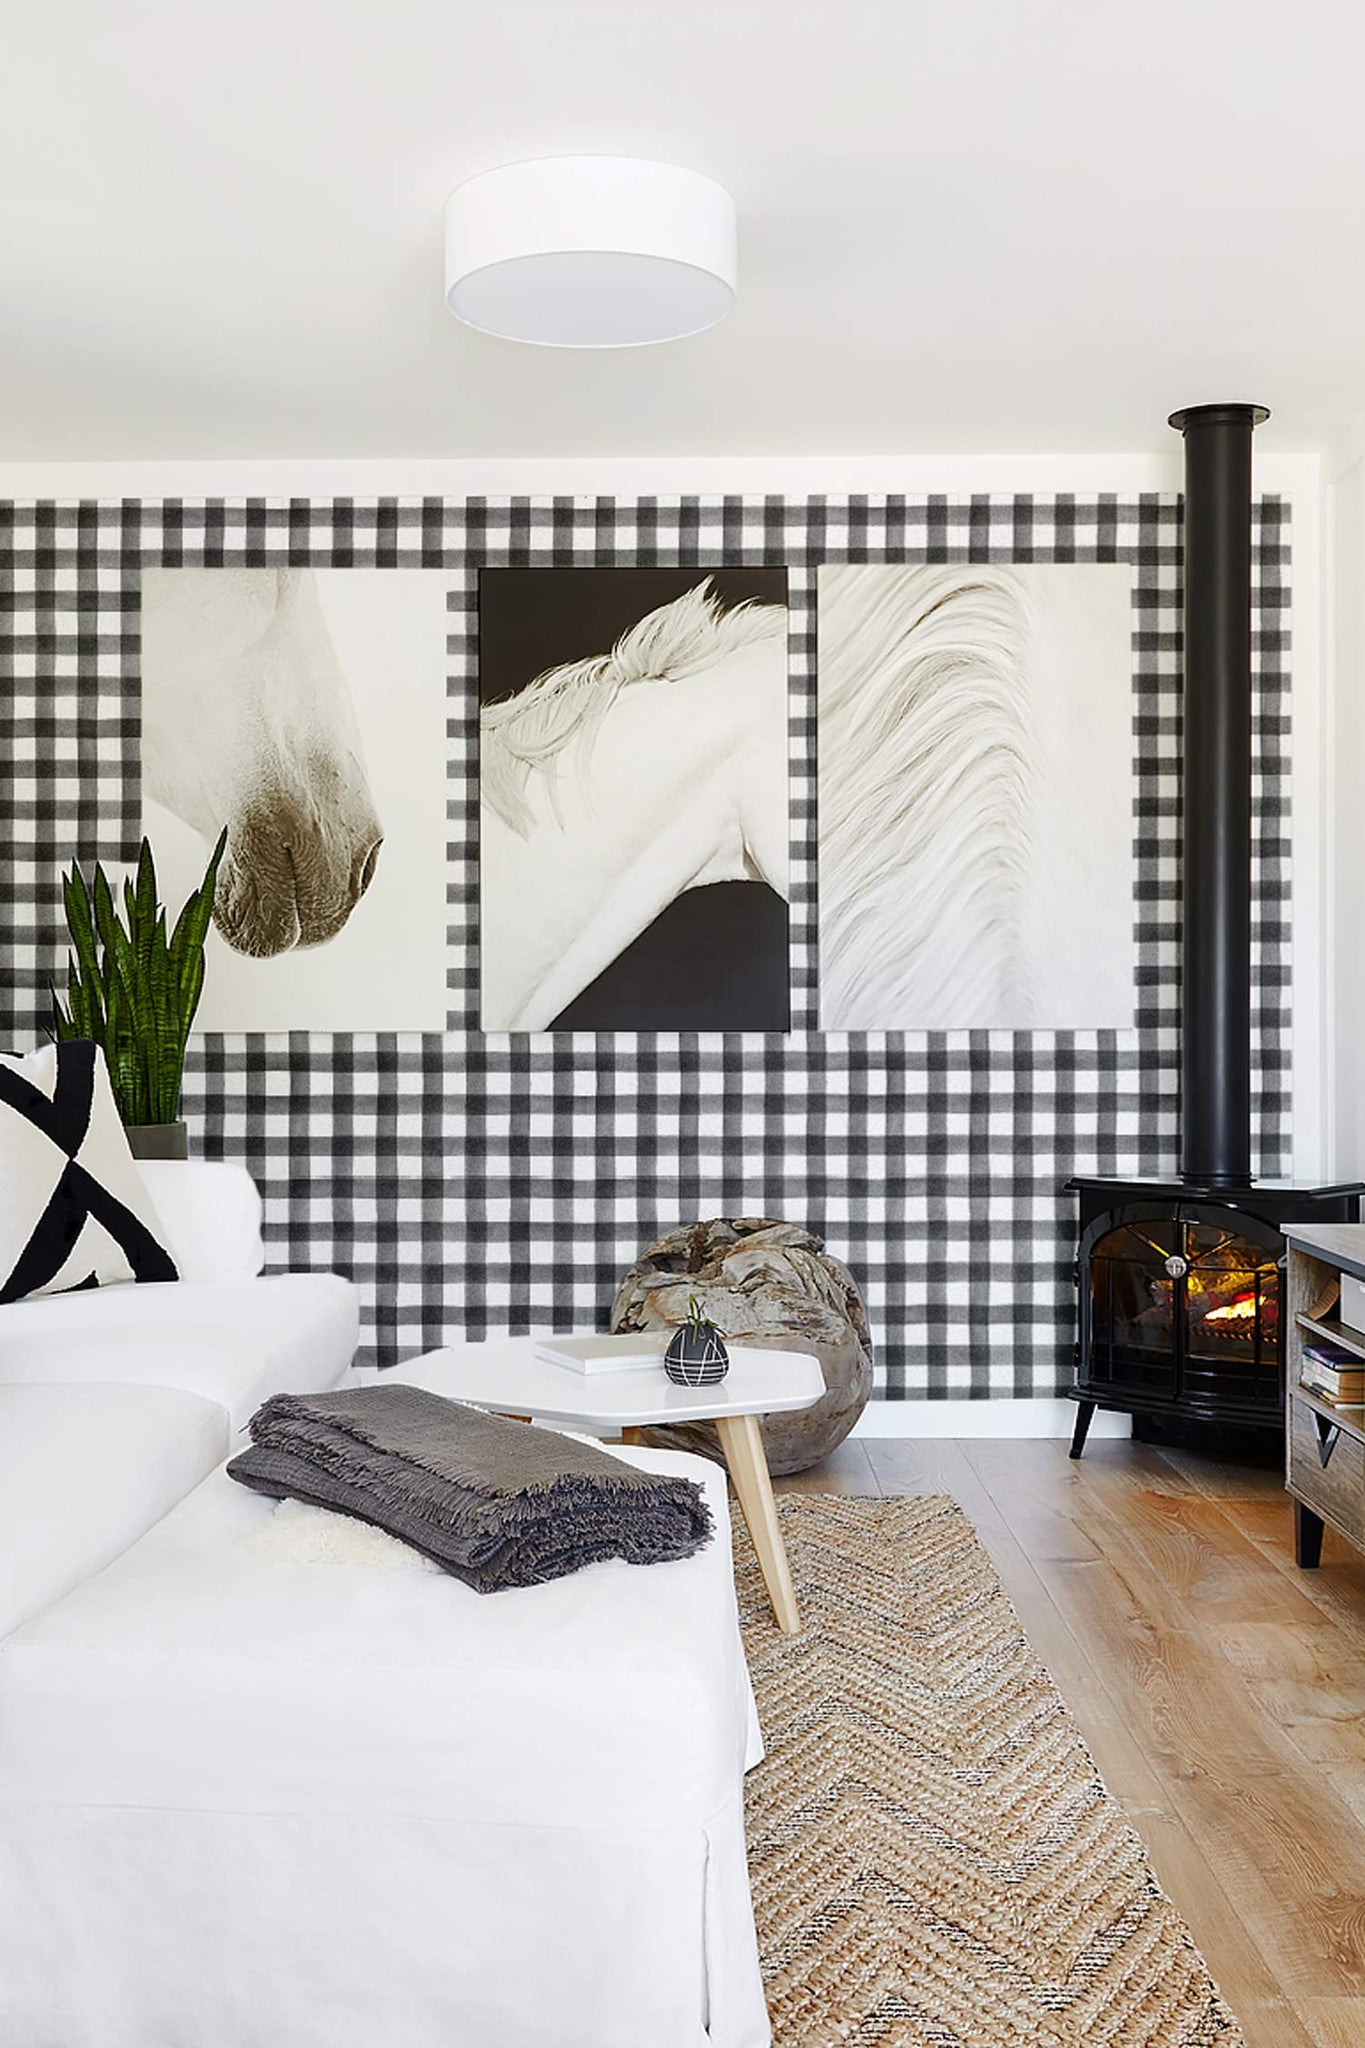 17 Modern Wallpaper Ideas To Add Life To The Living Room - Home Decor